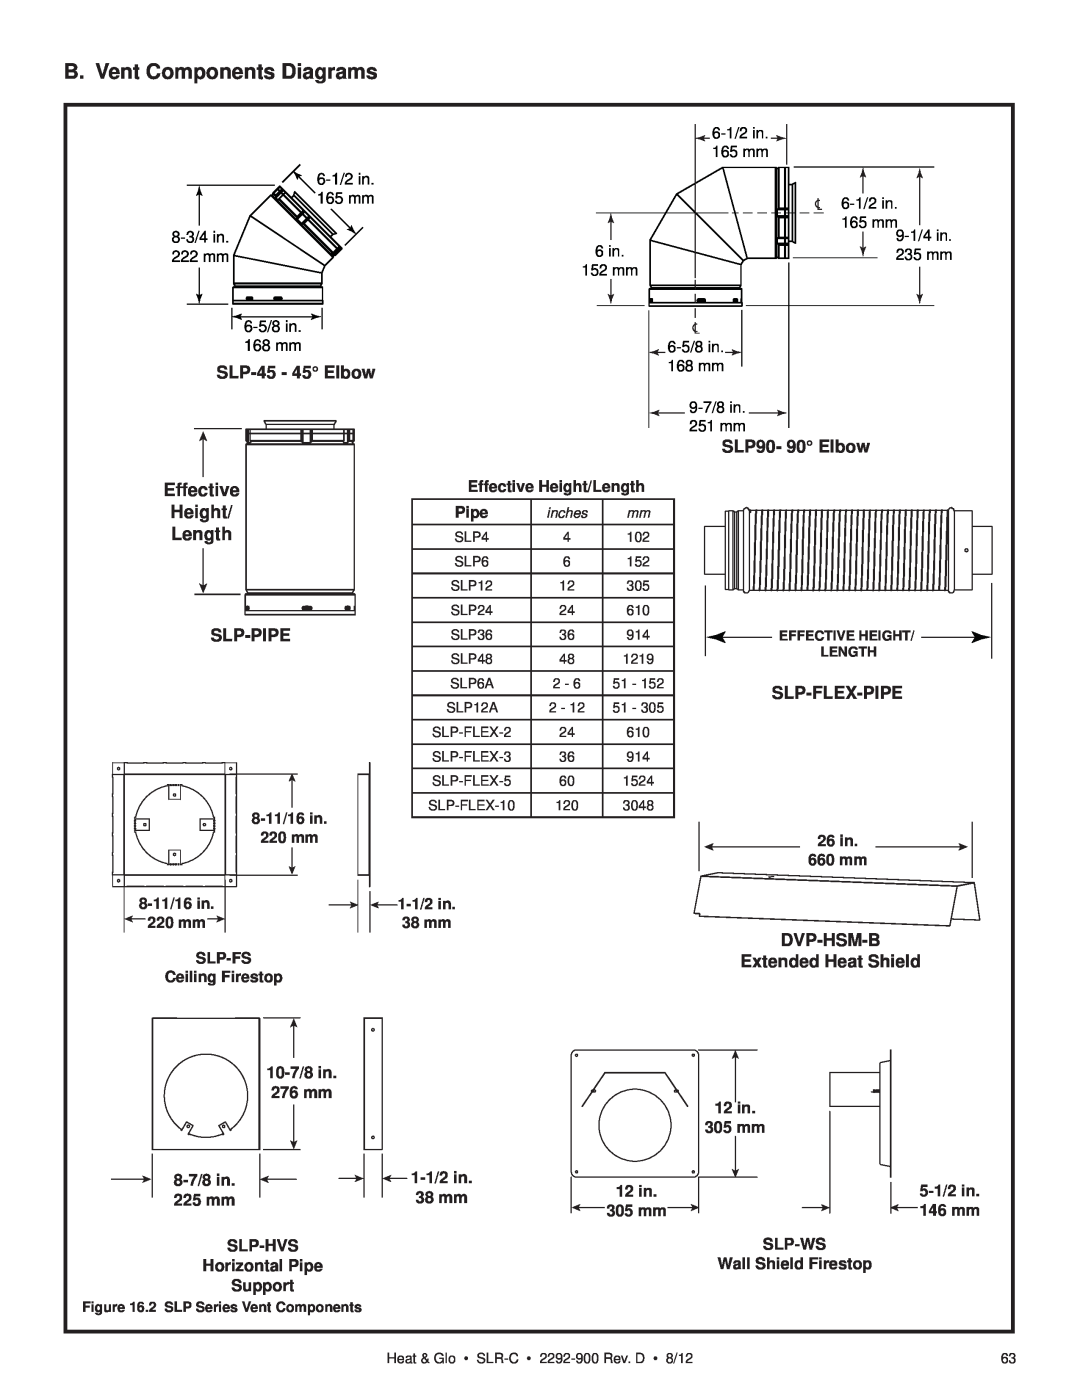 Heat & Glo LifeStyle SLR-C (COSMO) B. Vent Components Diagrams, Effective Height Length, 6-1/2in, 165 mm, 8-3/4in, 222 mm 